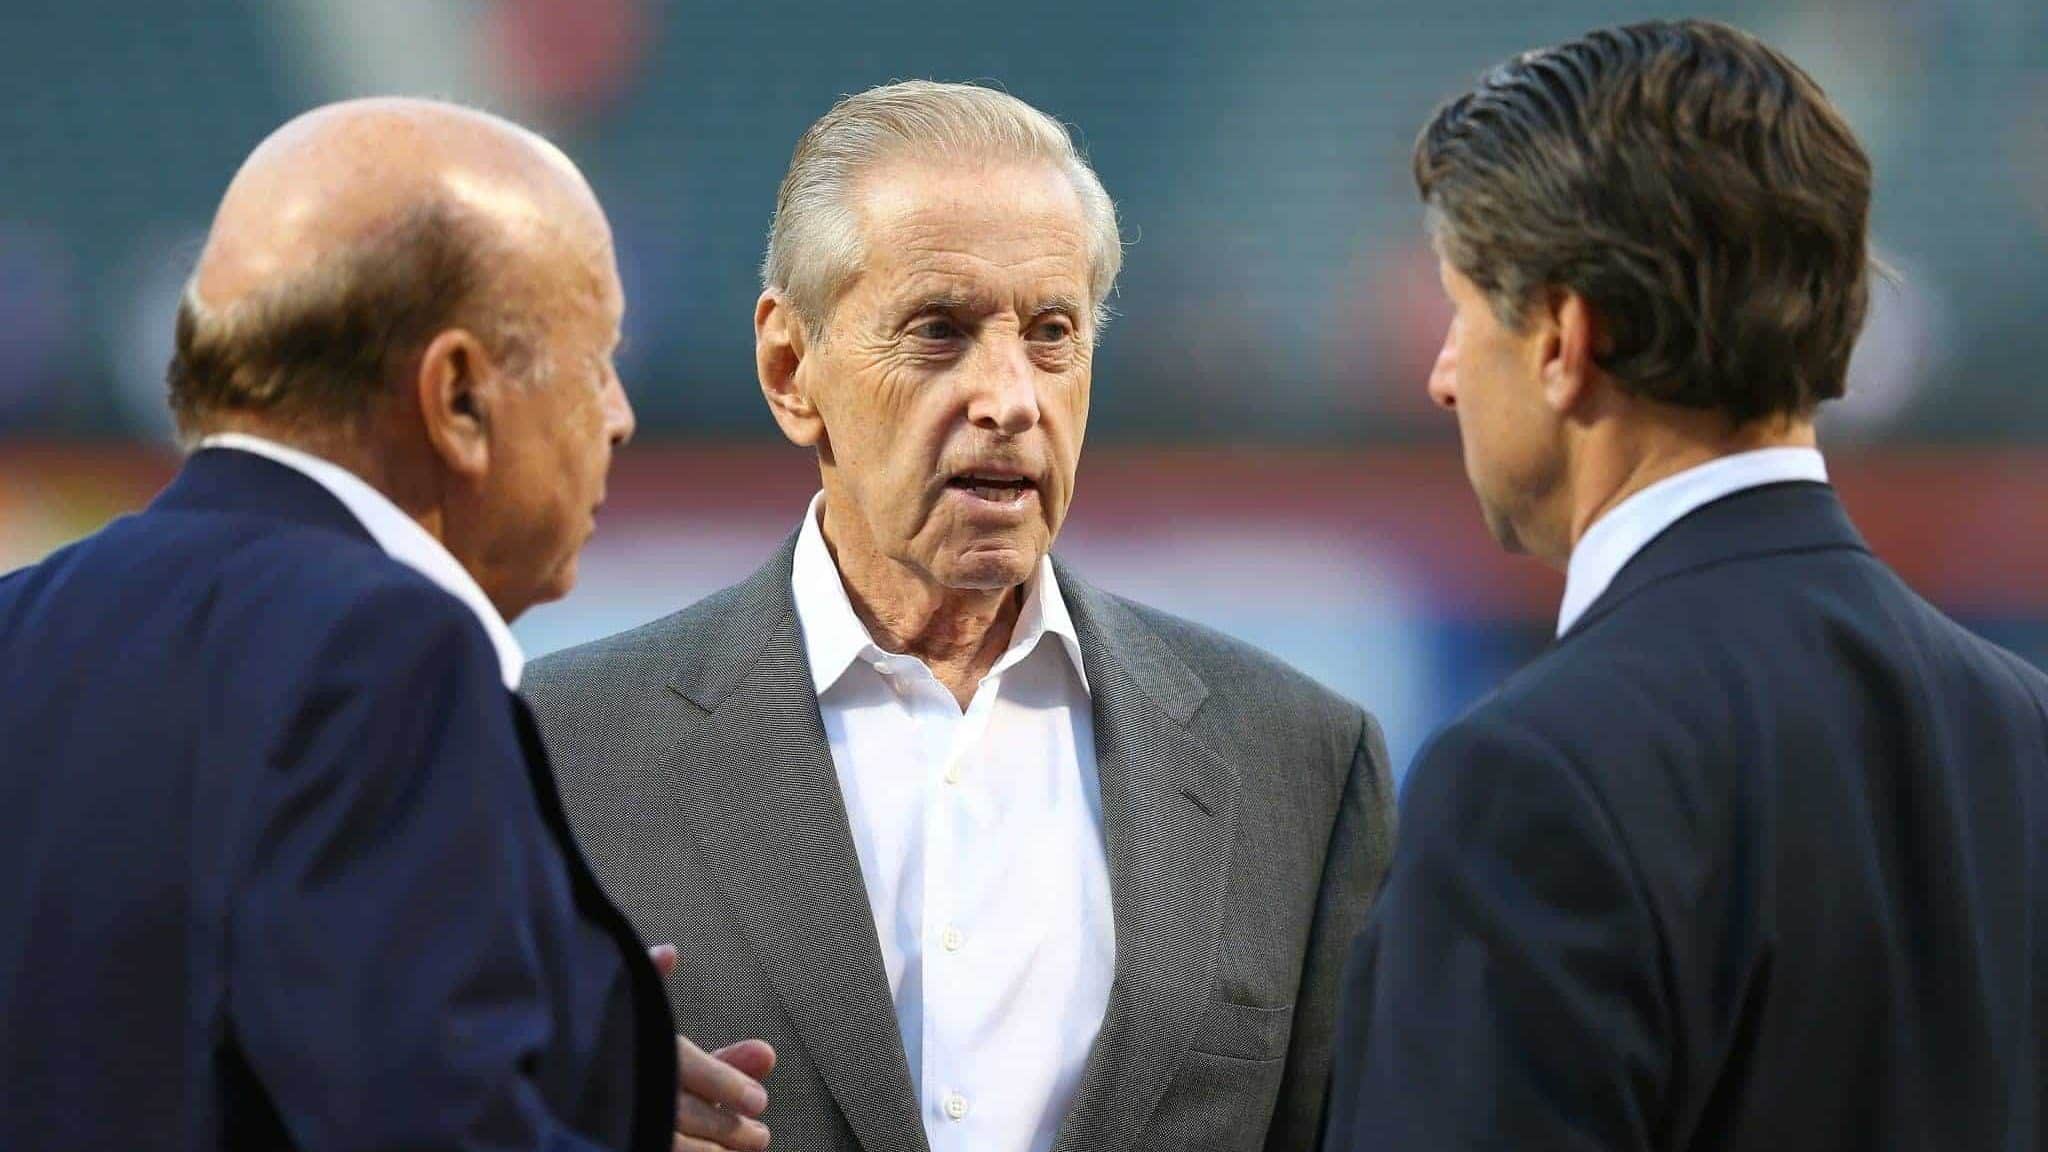 NEW YORK, NY - OCTOBER 13: (L-R) Chief Executive Officer Saul Katz, Owner Fred Wilpon and Chief Operating Officer Jeff Wilpon of the New York Mets talk prior to game four of the National League Division Series against the Los Angeles Dodgers at Citi Field on October 13, 2015 in New York City.